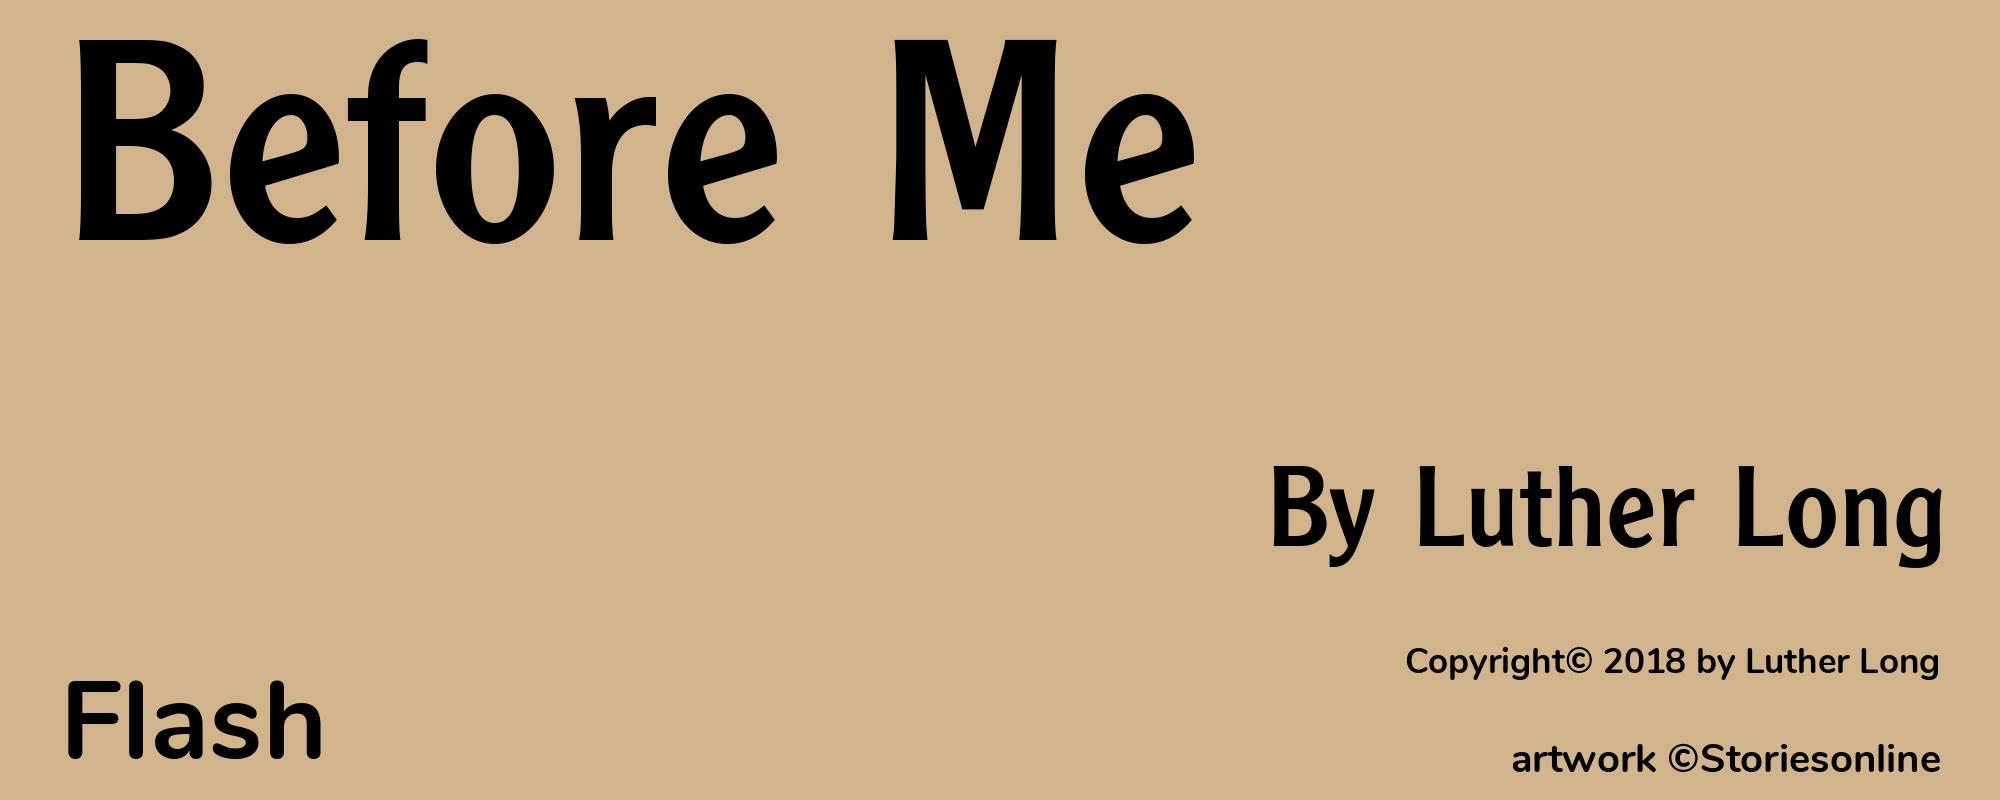 Before Me - Cover